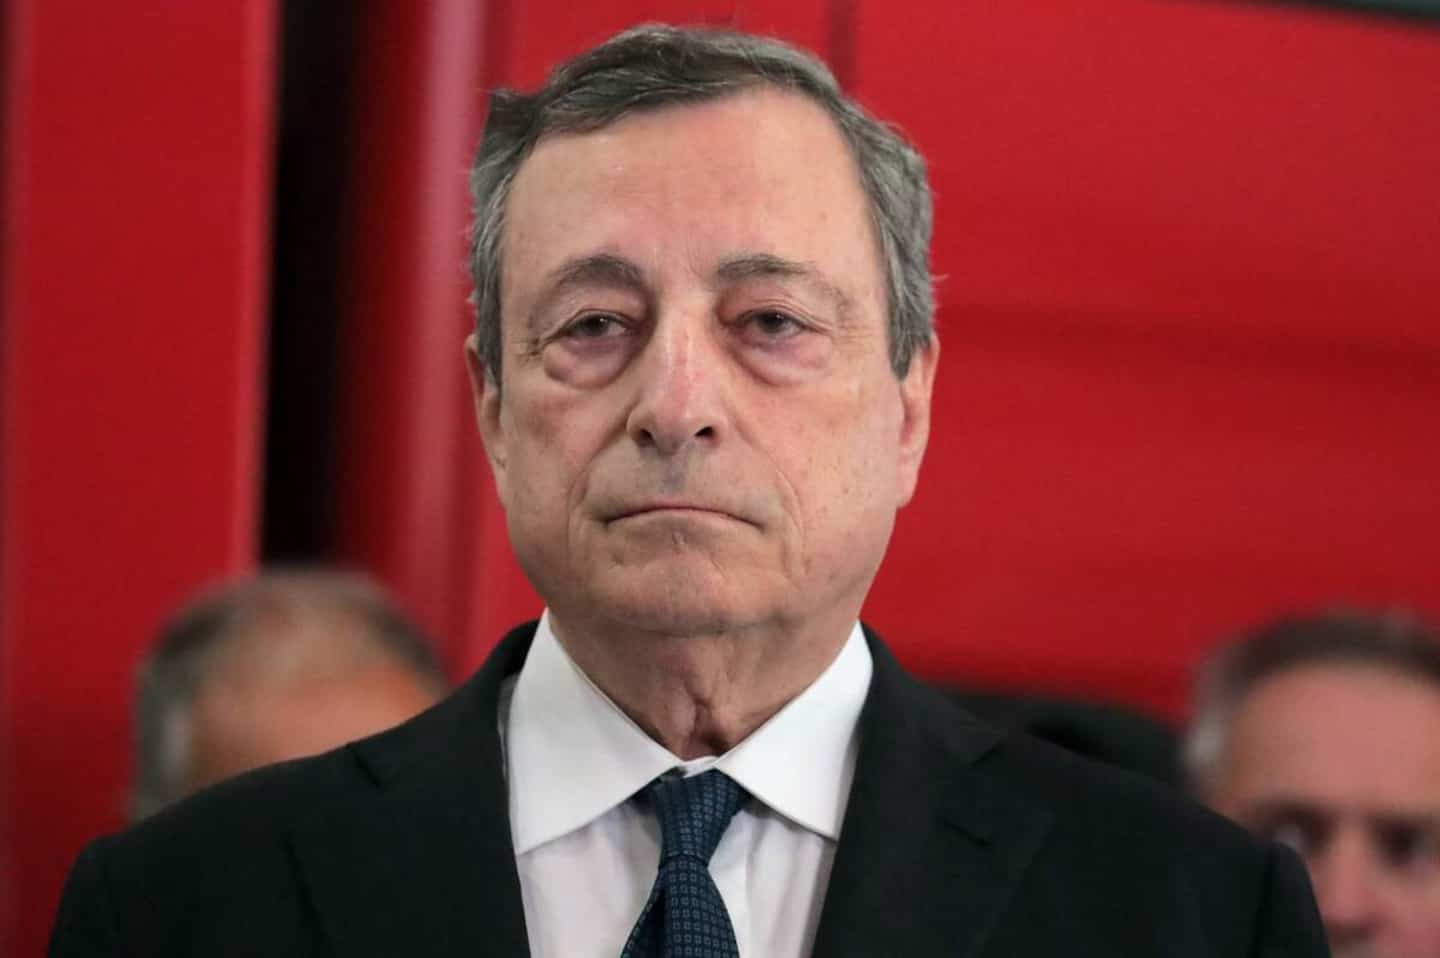 Italy: Draghi throws in the towel after the defection of a party from his coalition